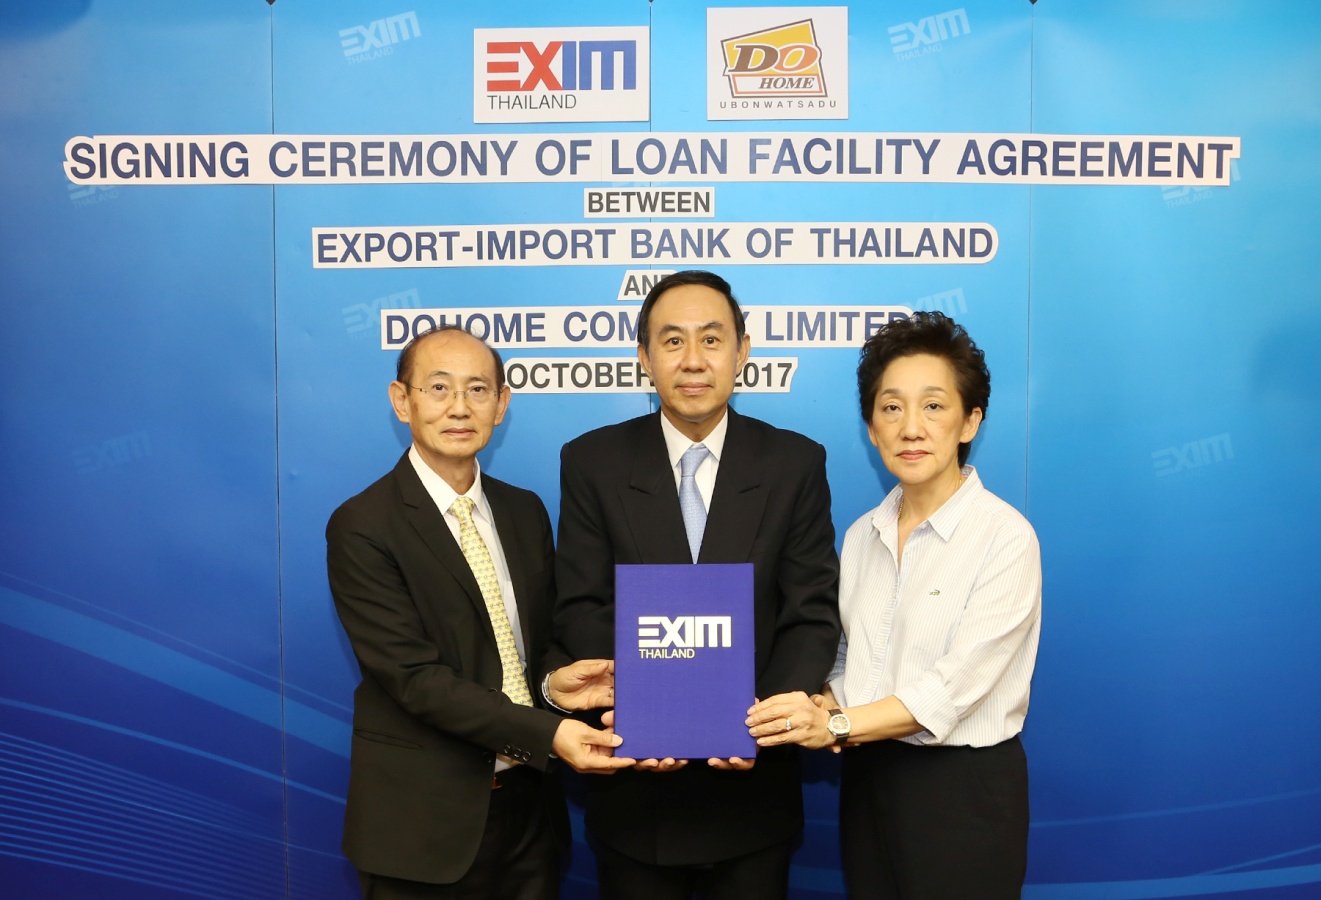 EXIM Thailand Finances Construction of DOHOME Co., Ltd.’s Distribution Center to Promote Export of Construction and Home Decoration Materials to Lao PDR